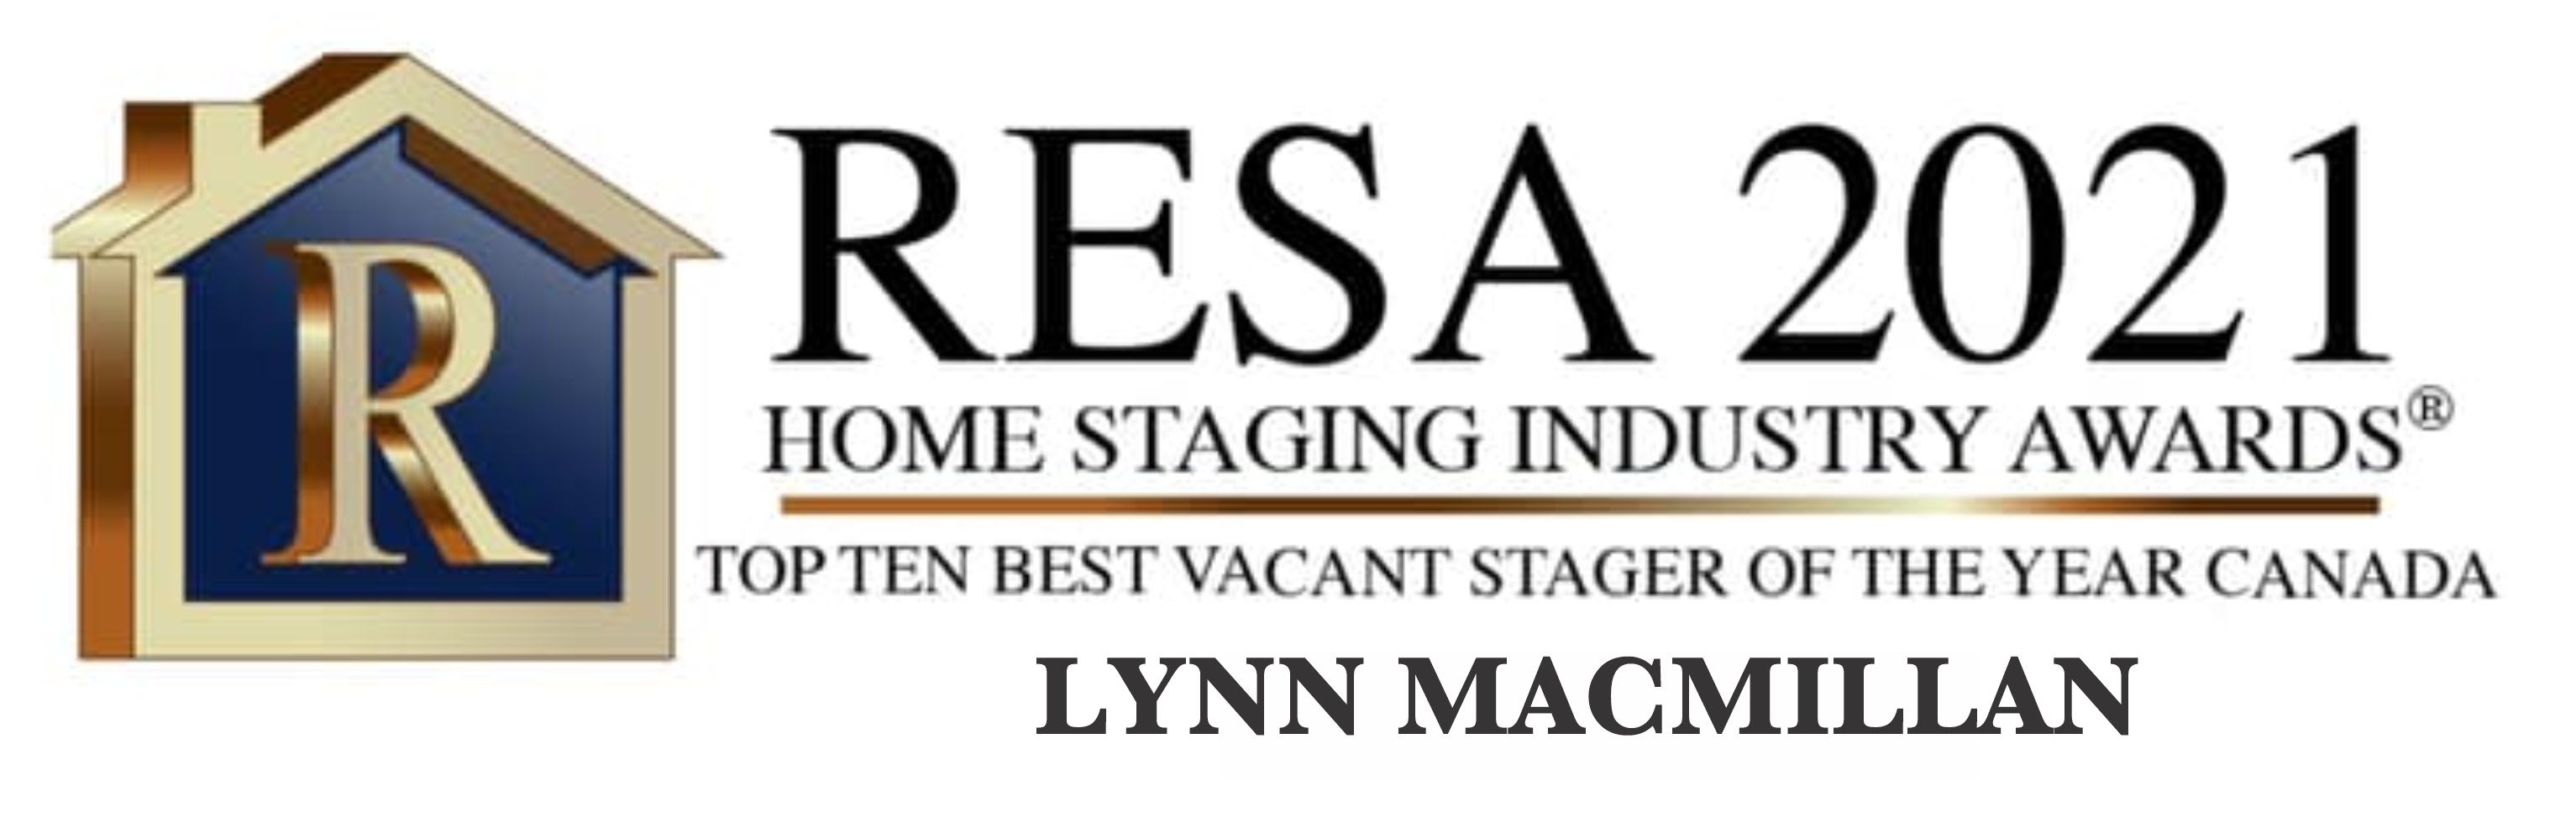 top 10 finalist RESA best vacant stager canada 